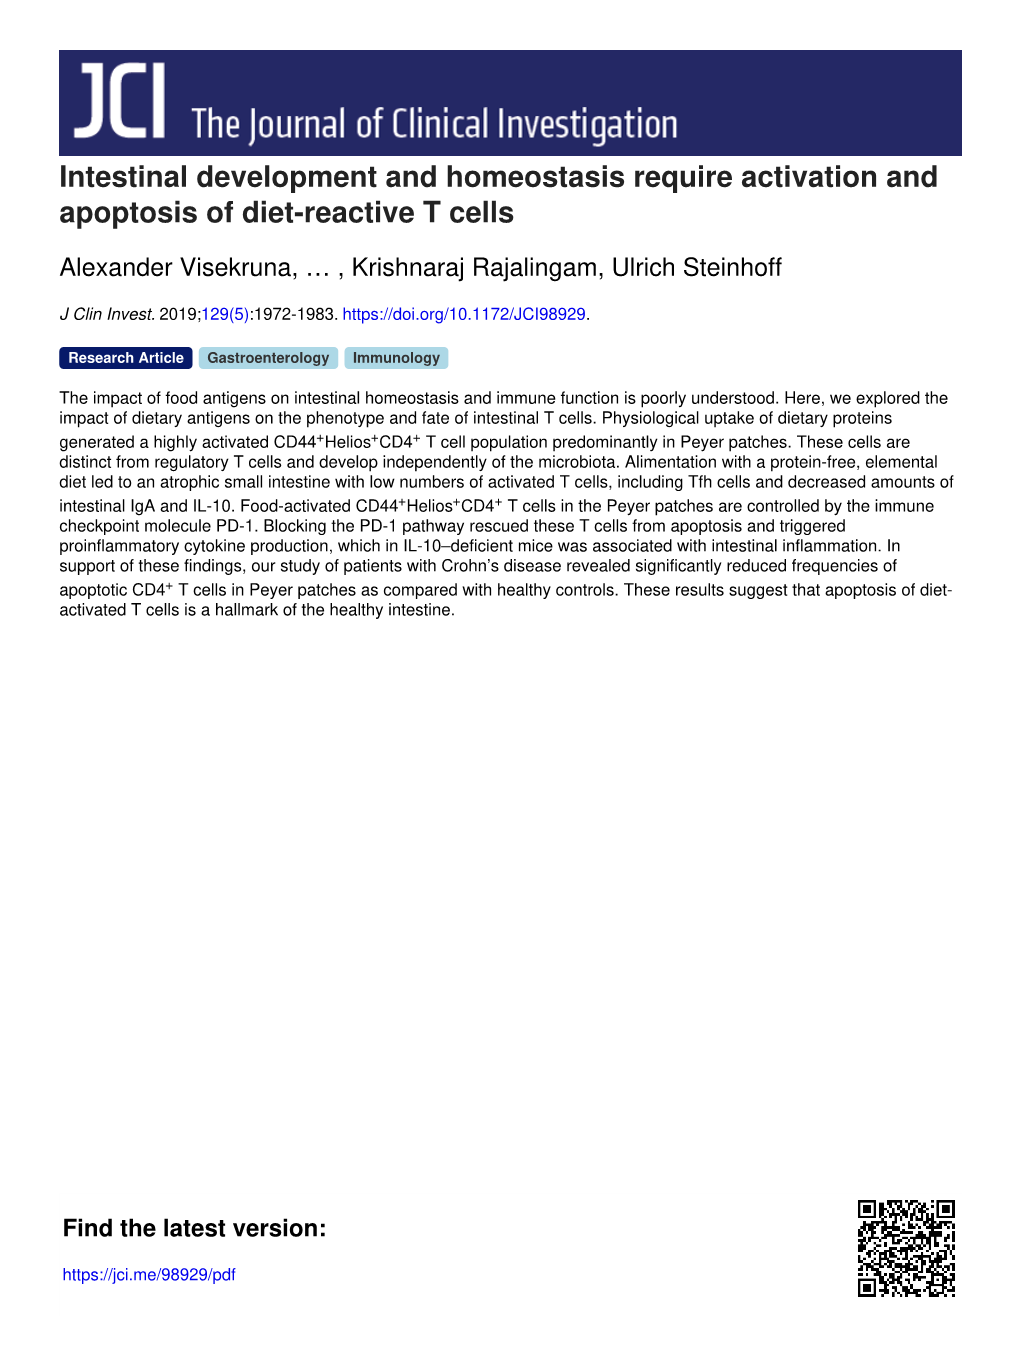 Intestinal Development and Homeostasis Require Activation and Apoptosis of Diet-Reactive T Cells